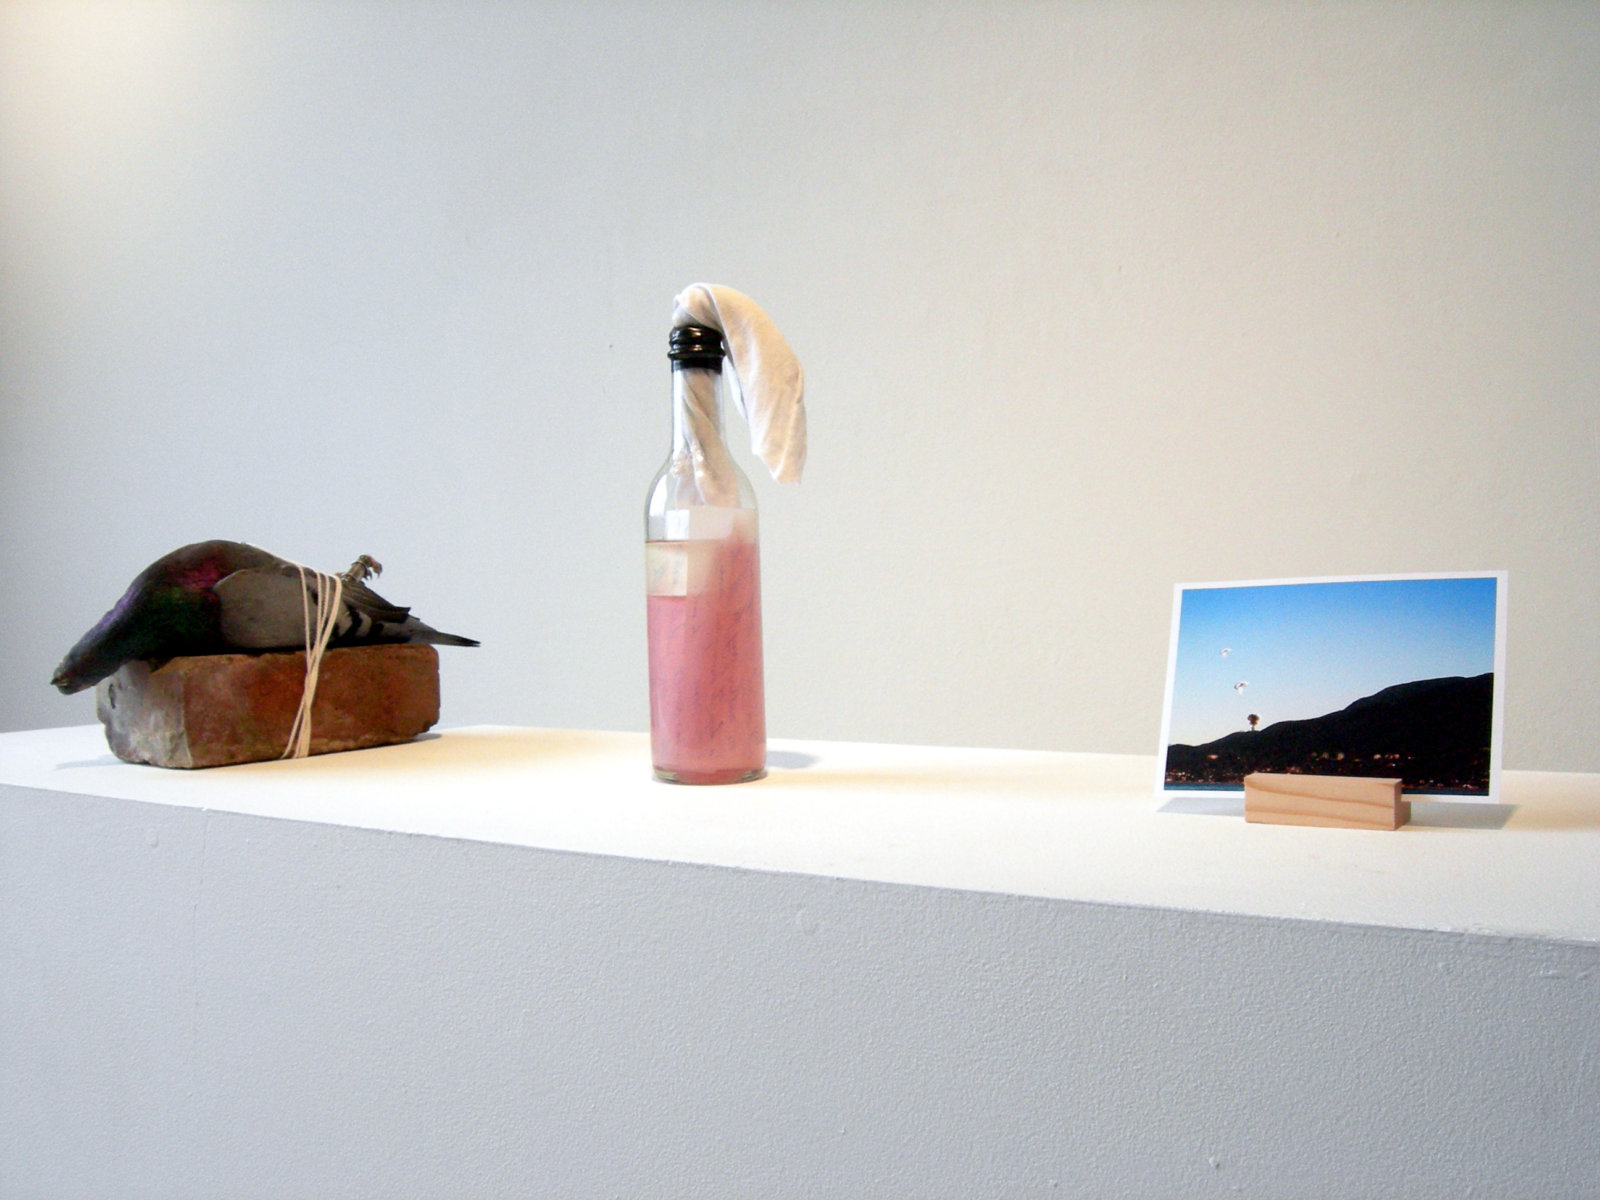 Abbas Akhavan, Correspondences, 2007, taxidermy pigeon, brick, string, letter carrier and letter, glass bottle, oil, gasoline, electric tape, cloth, letter, postcard, dimensions variable